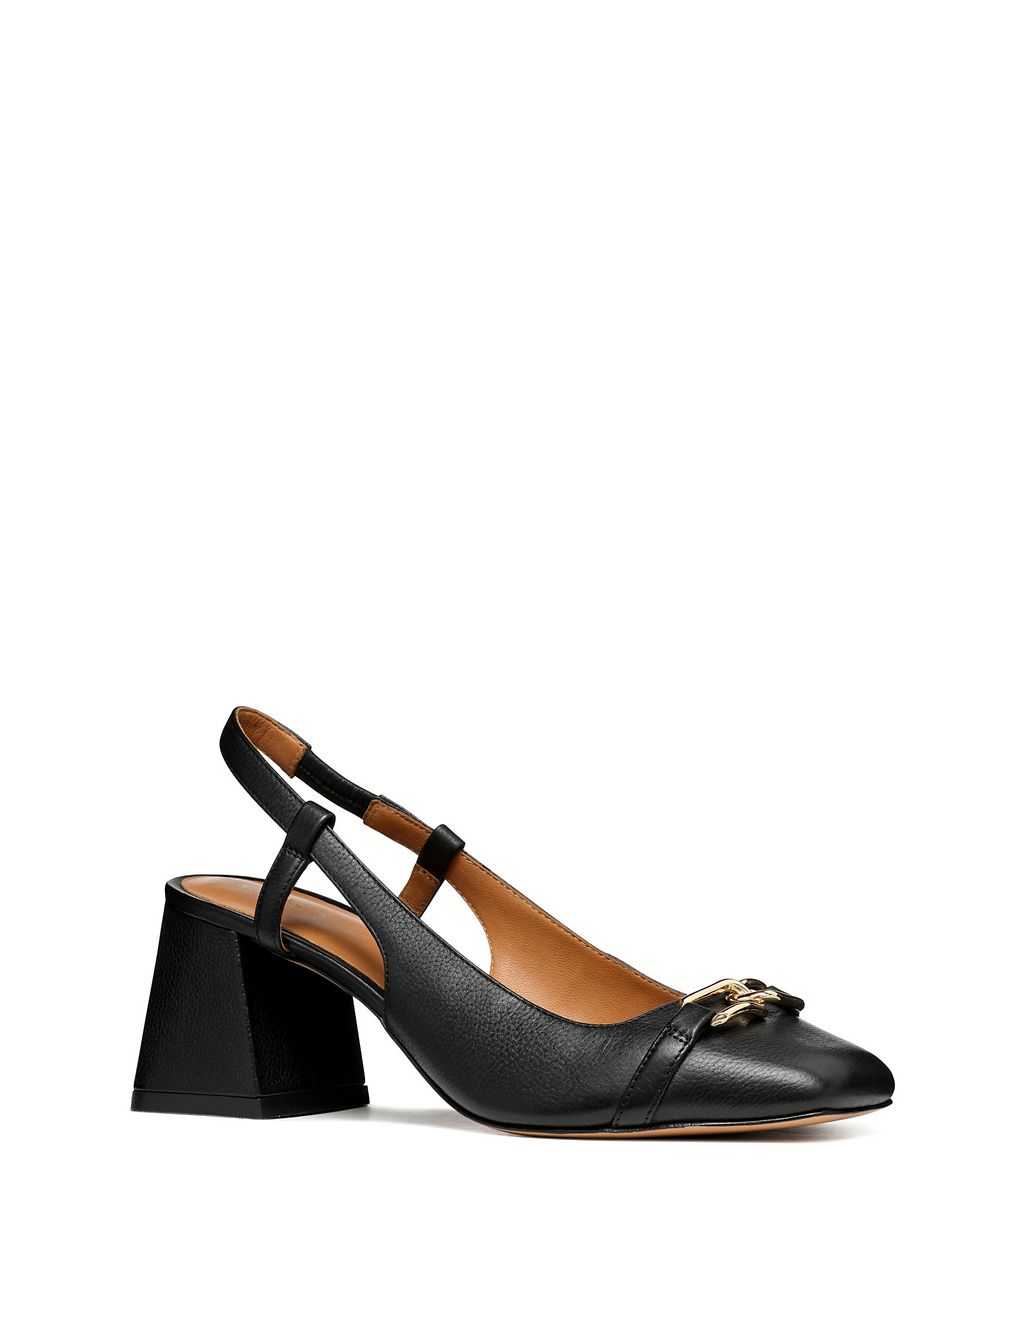 Leather Block Heel Square Toe Slingback Shoes 1 of 6